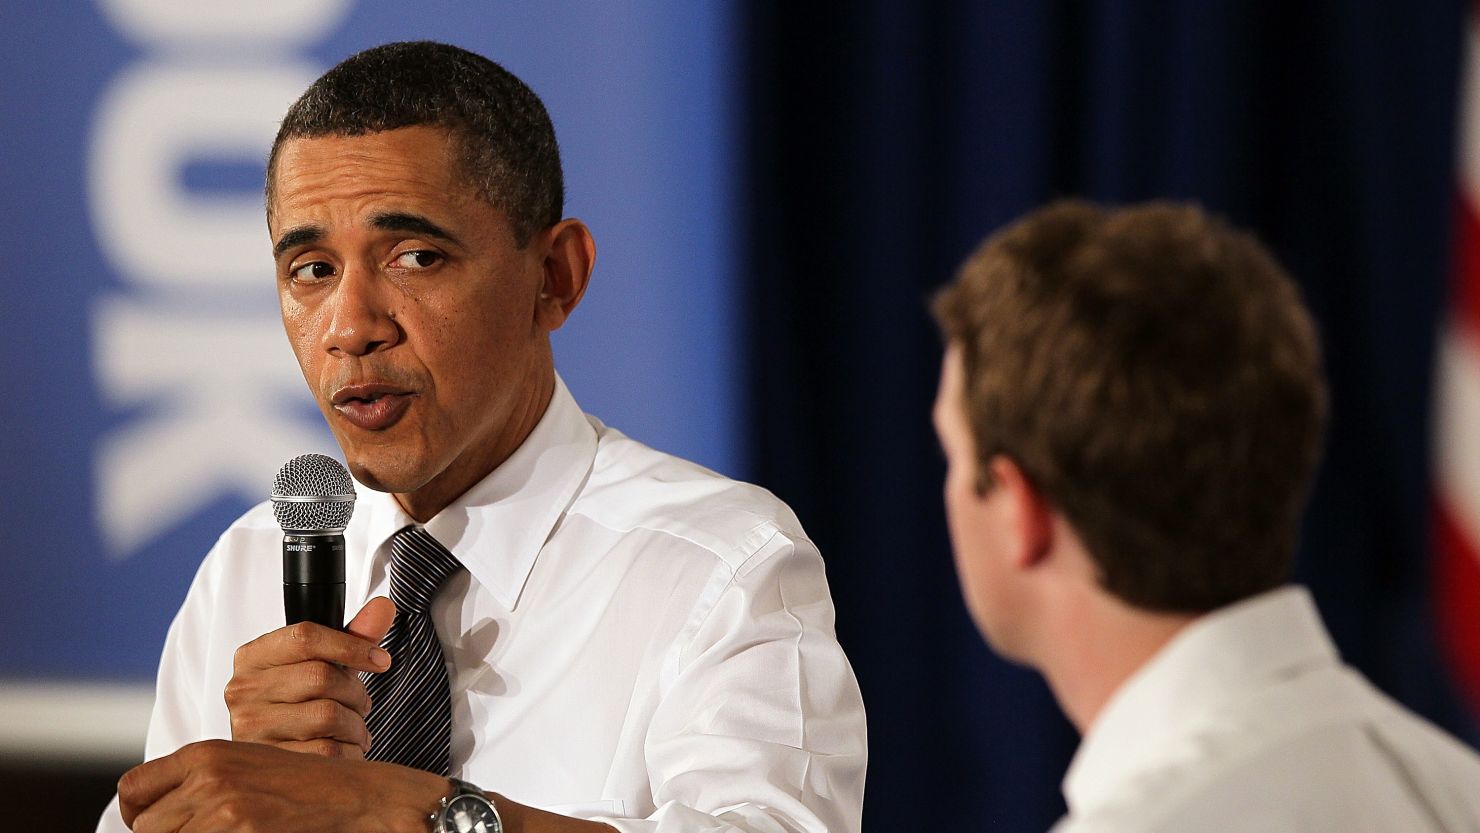 President Barack Obama talks with Facebook CEO Mark Zuckerberg during an event at Facebook headquarters in April 2011.